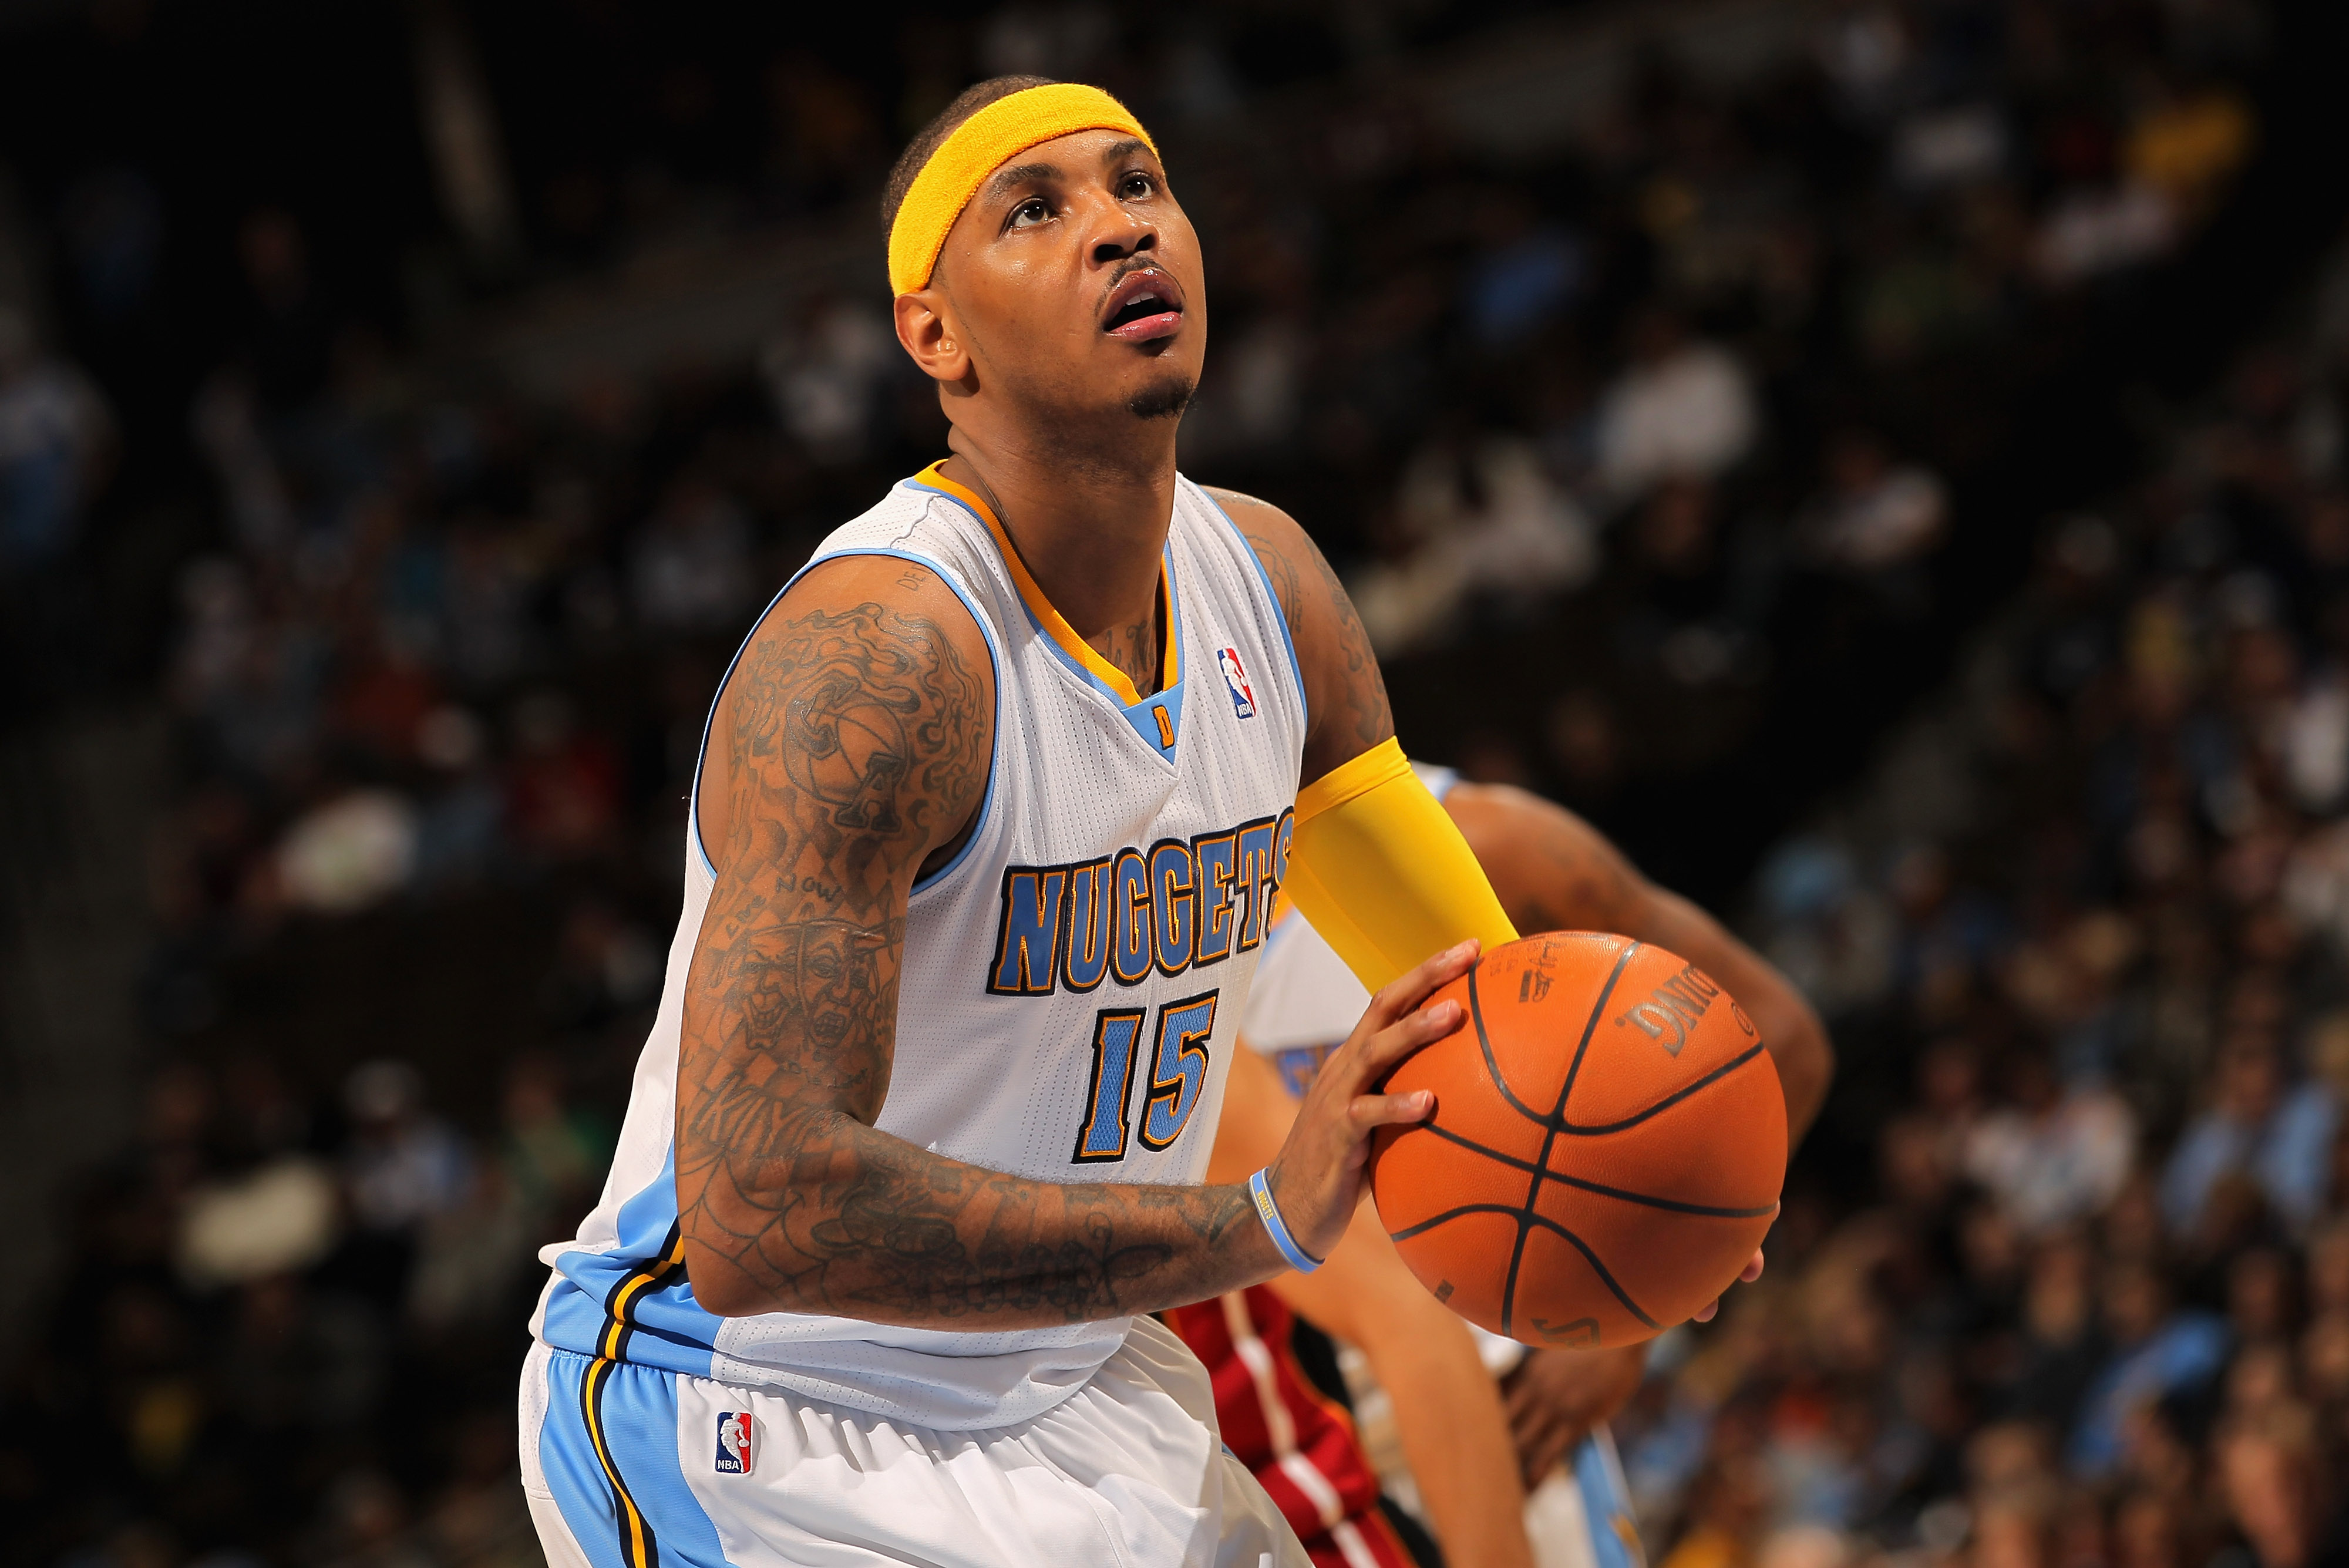 DENVER, CO - JANUARY 13:  Carmelo Anthony #15 of the Denver Nuggets takes a free throw against the Miami Heat at the Pepsi Center on January 13, 2011 in Denver, Colorado. The Nuggets defeated the Heat 130-102. NOTE TO USER: User expressly acknowledges and